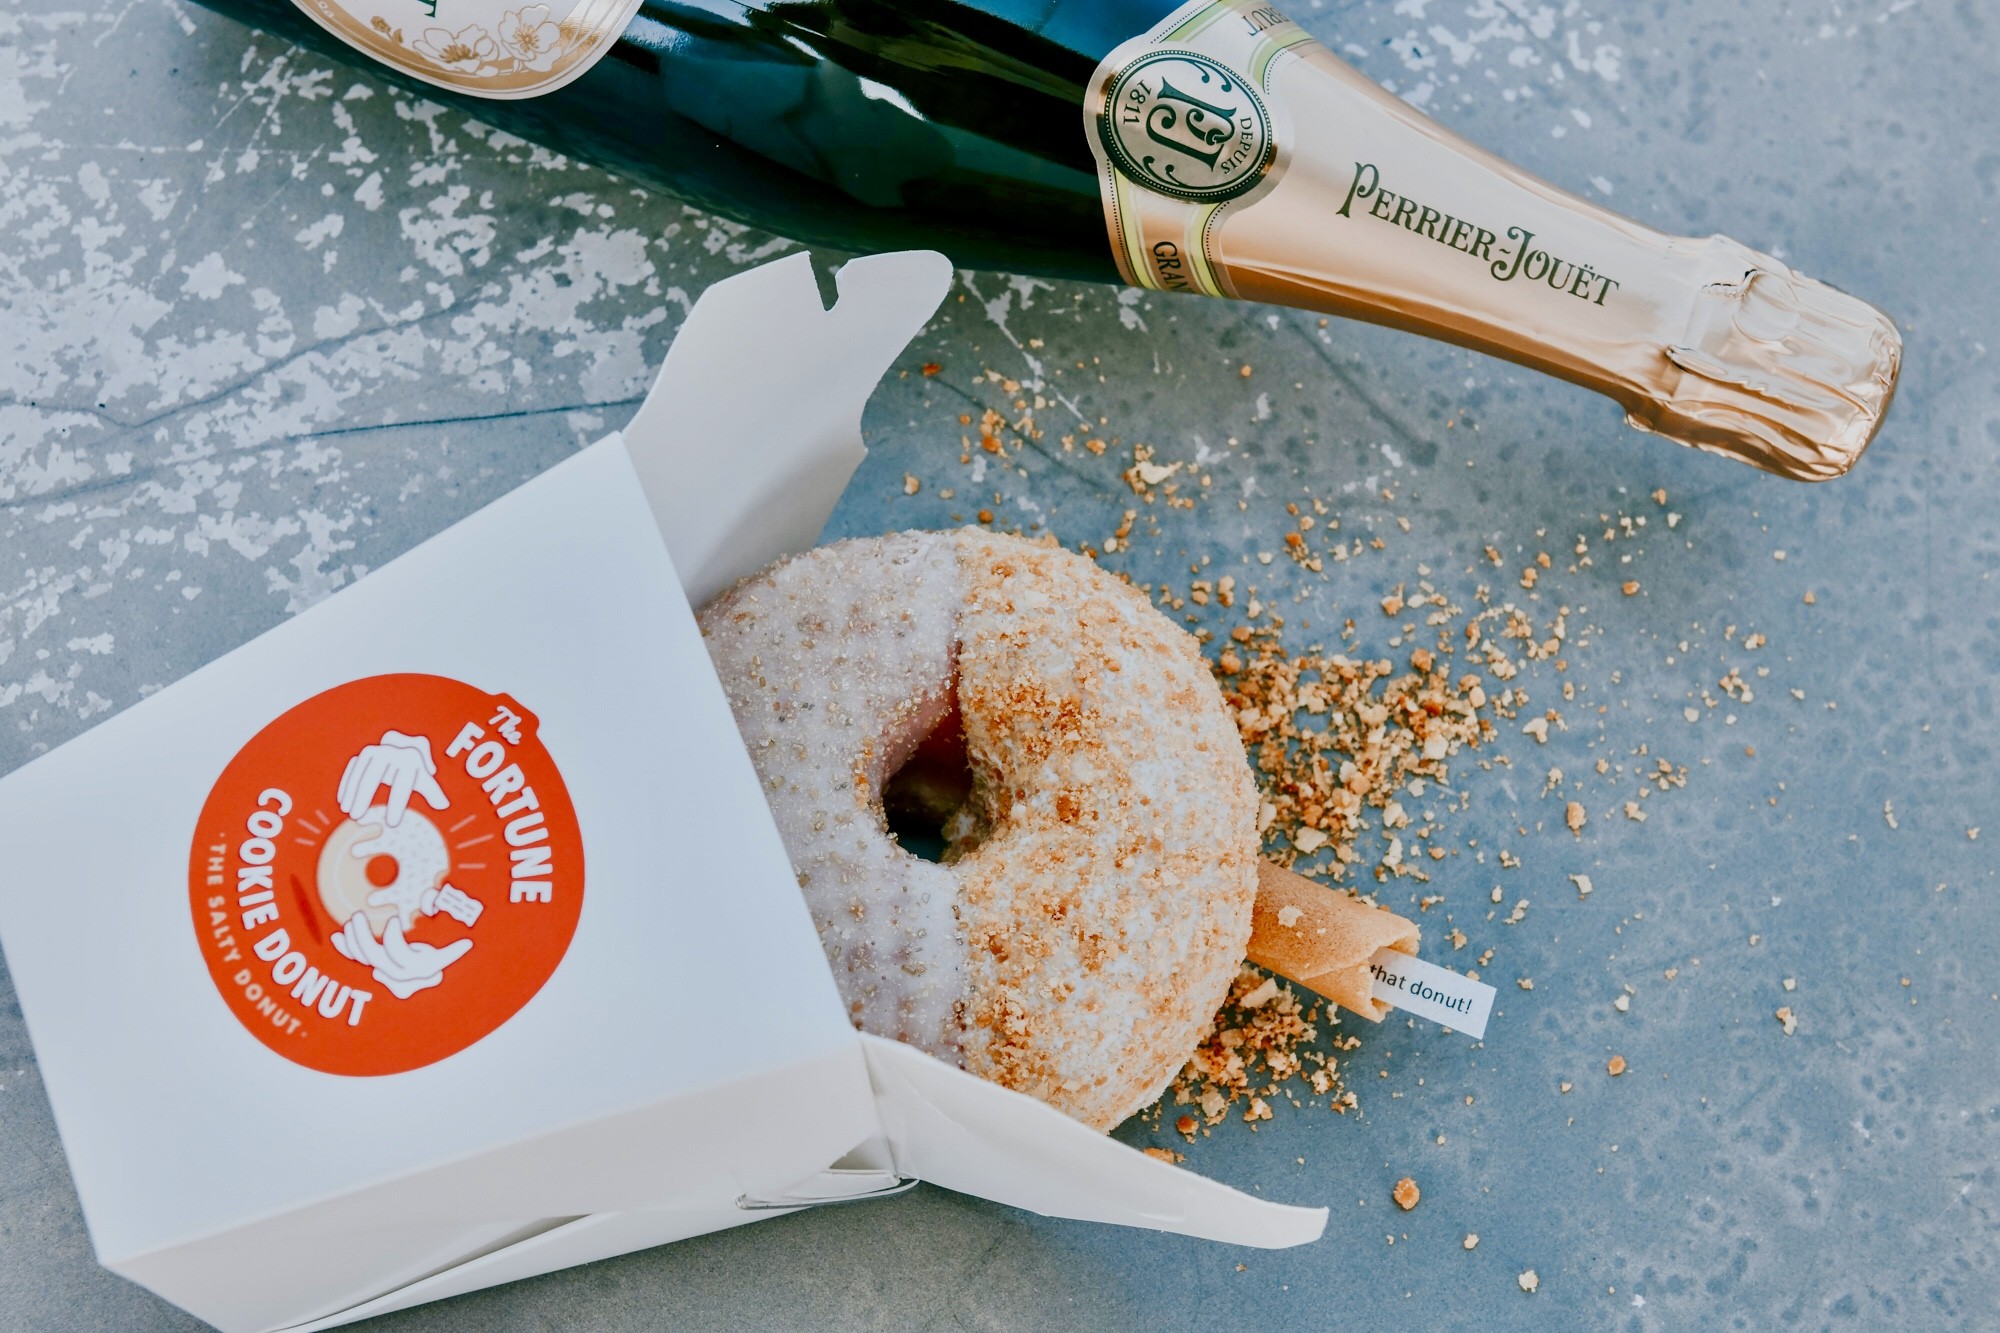 Fortune Cookie Doughnut at the Salty Donut Miami | Miami New Times